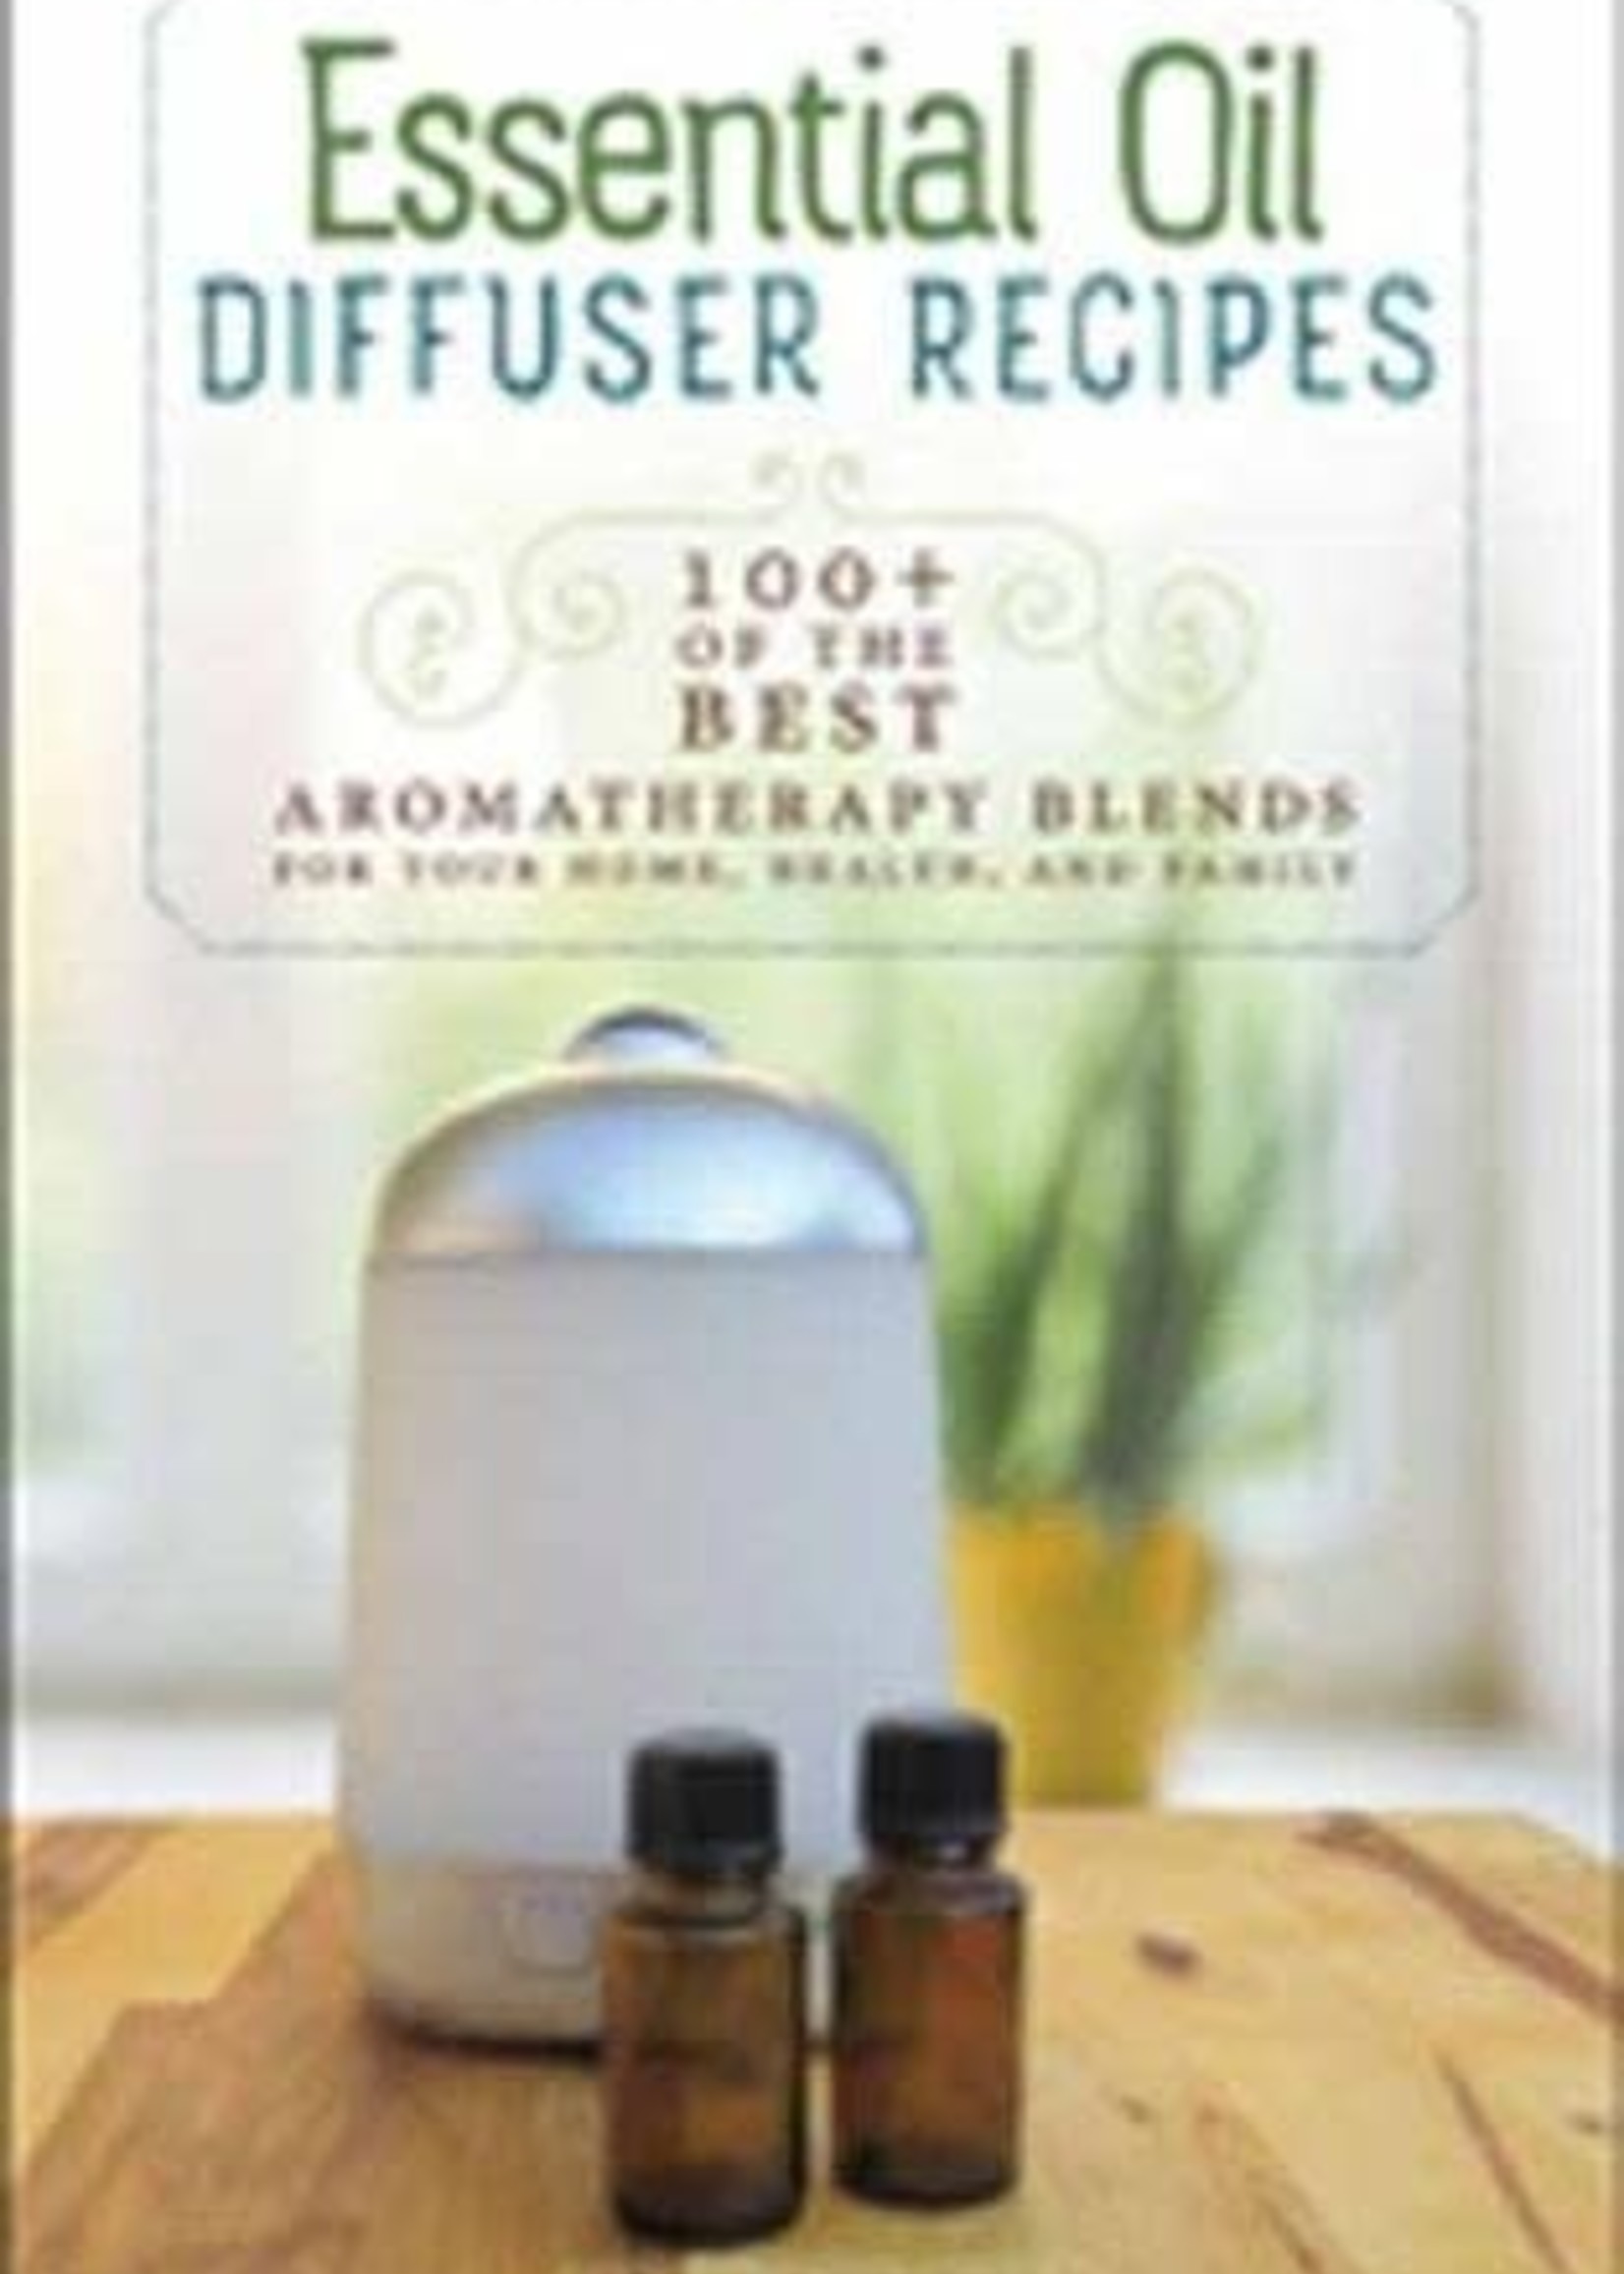 ESSENTIAL OIL DIFFUSER RECIPES: 100+ Of The Best Aromatherapy Blends For Your Home, Health & Family